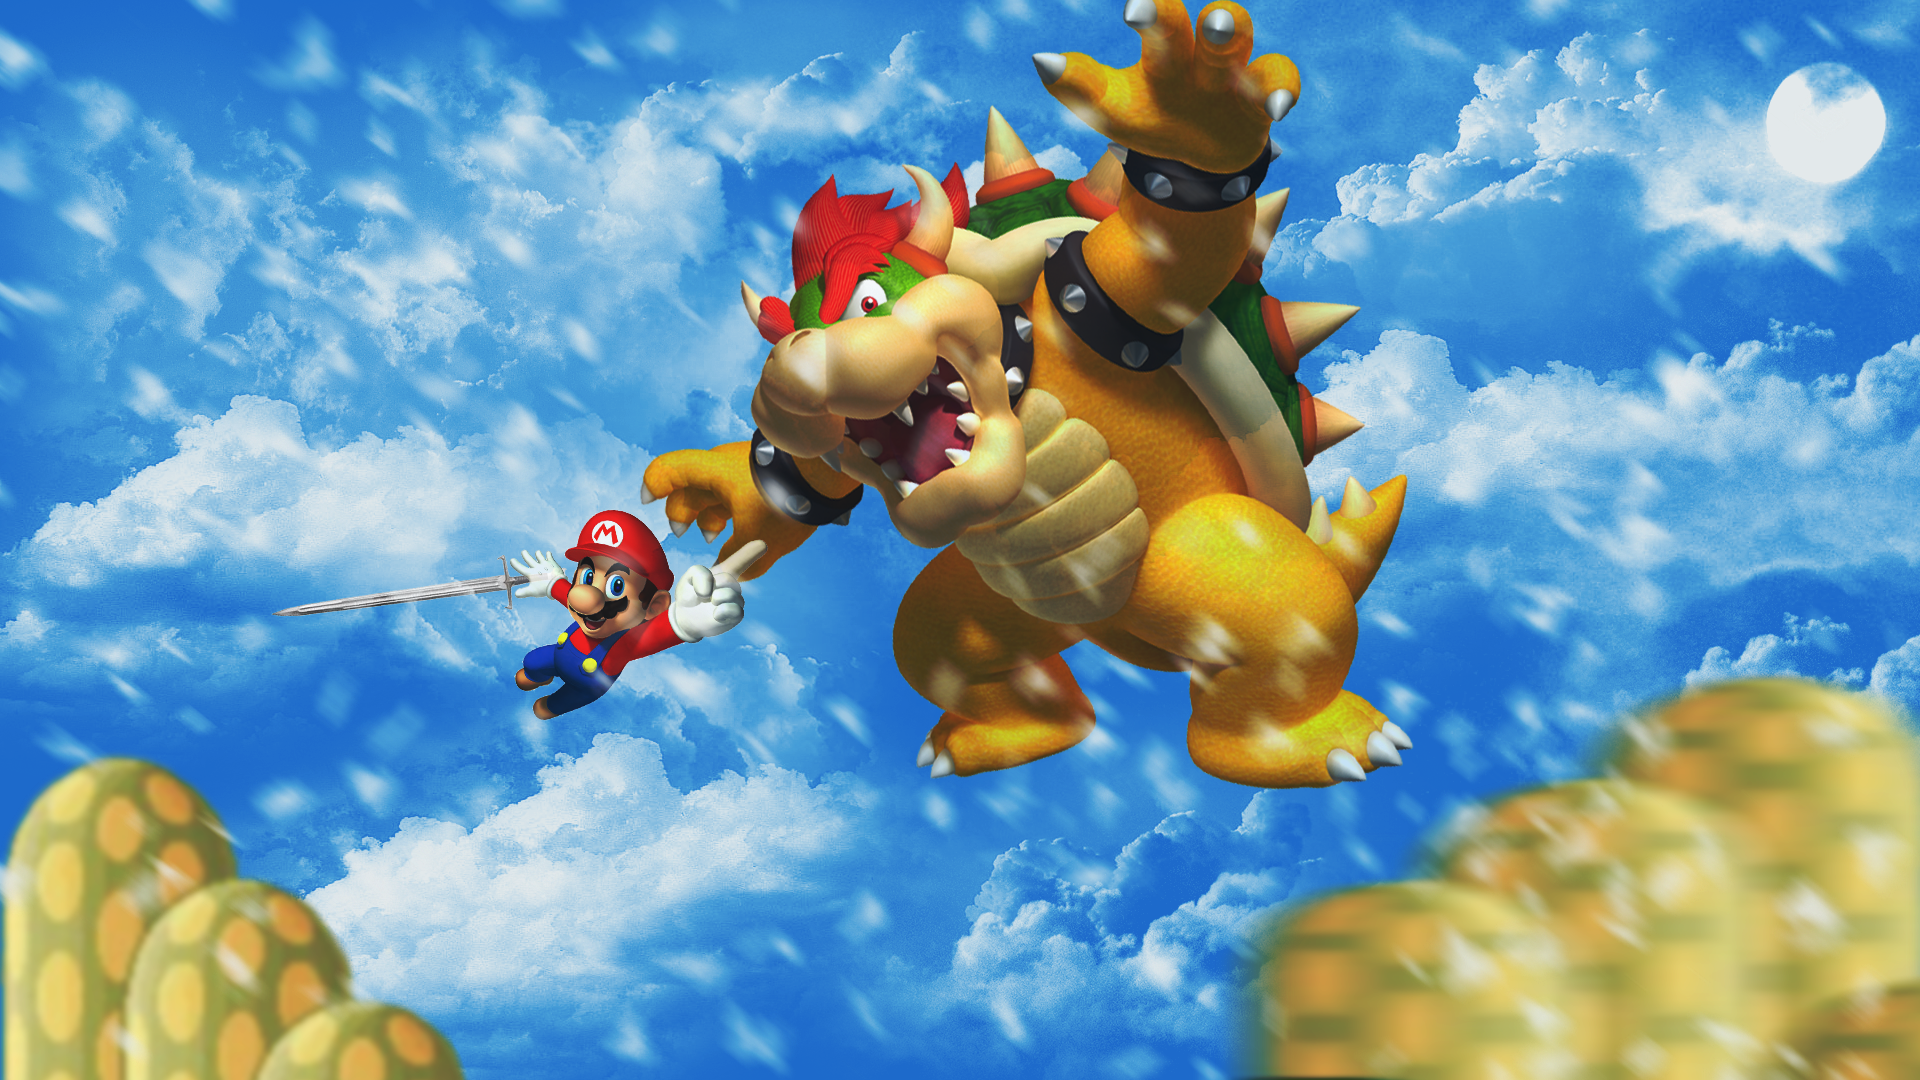 mario vs bowser by 3dbenjamin watch customization wallpaper other 2014 1920x1080